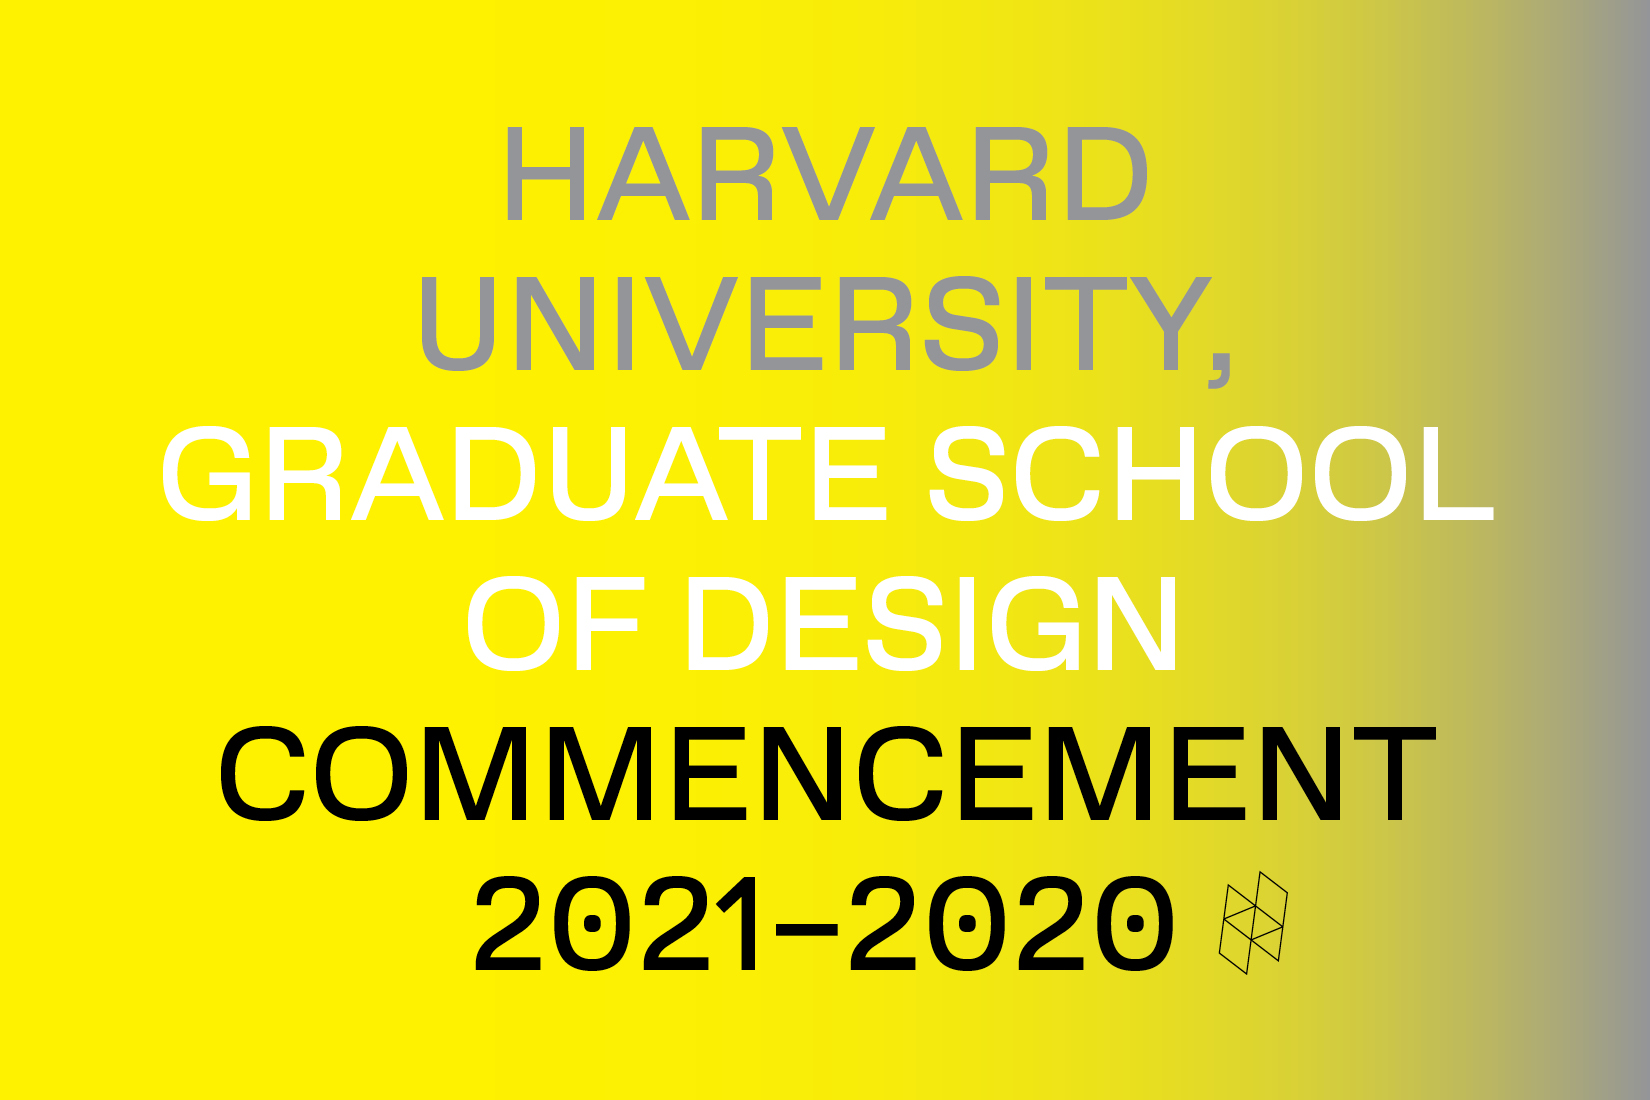 Yellow and grey image with grey, white, and black text advertising the Commencement for Class of 2021 and Class of 2020.